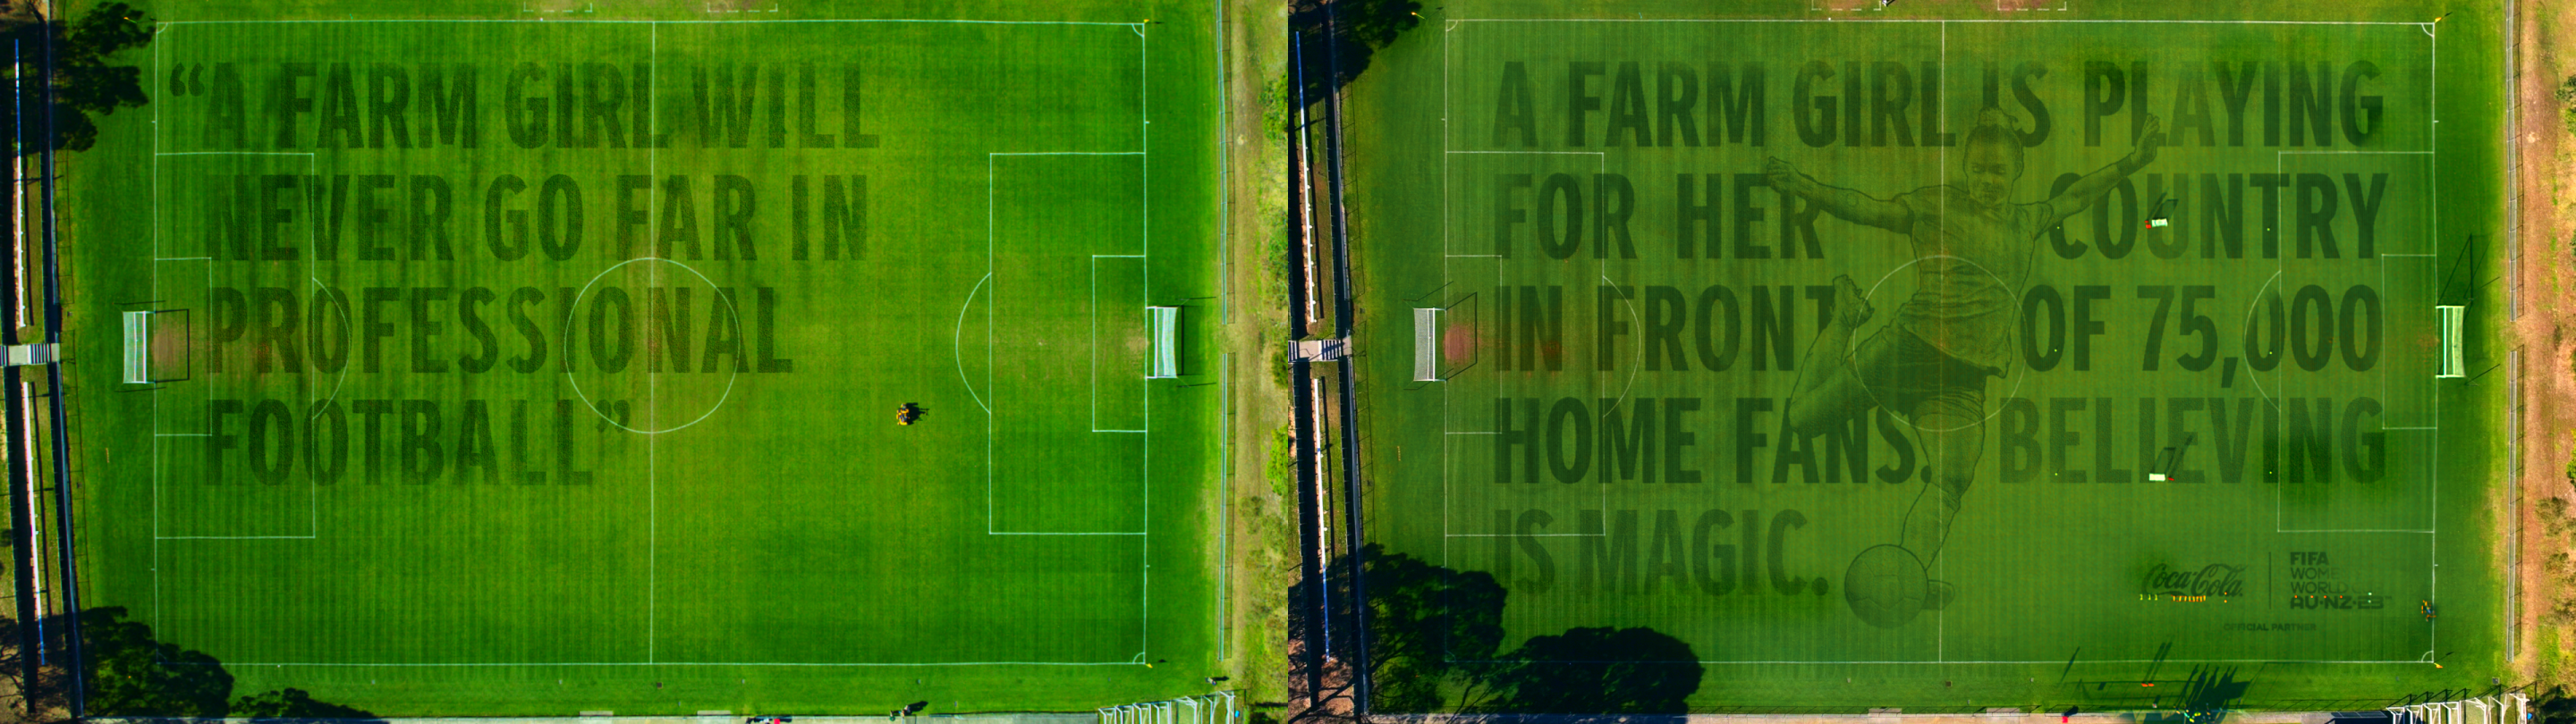 Overhead images of football pitches showing the messages superimposed on them